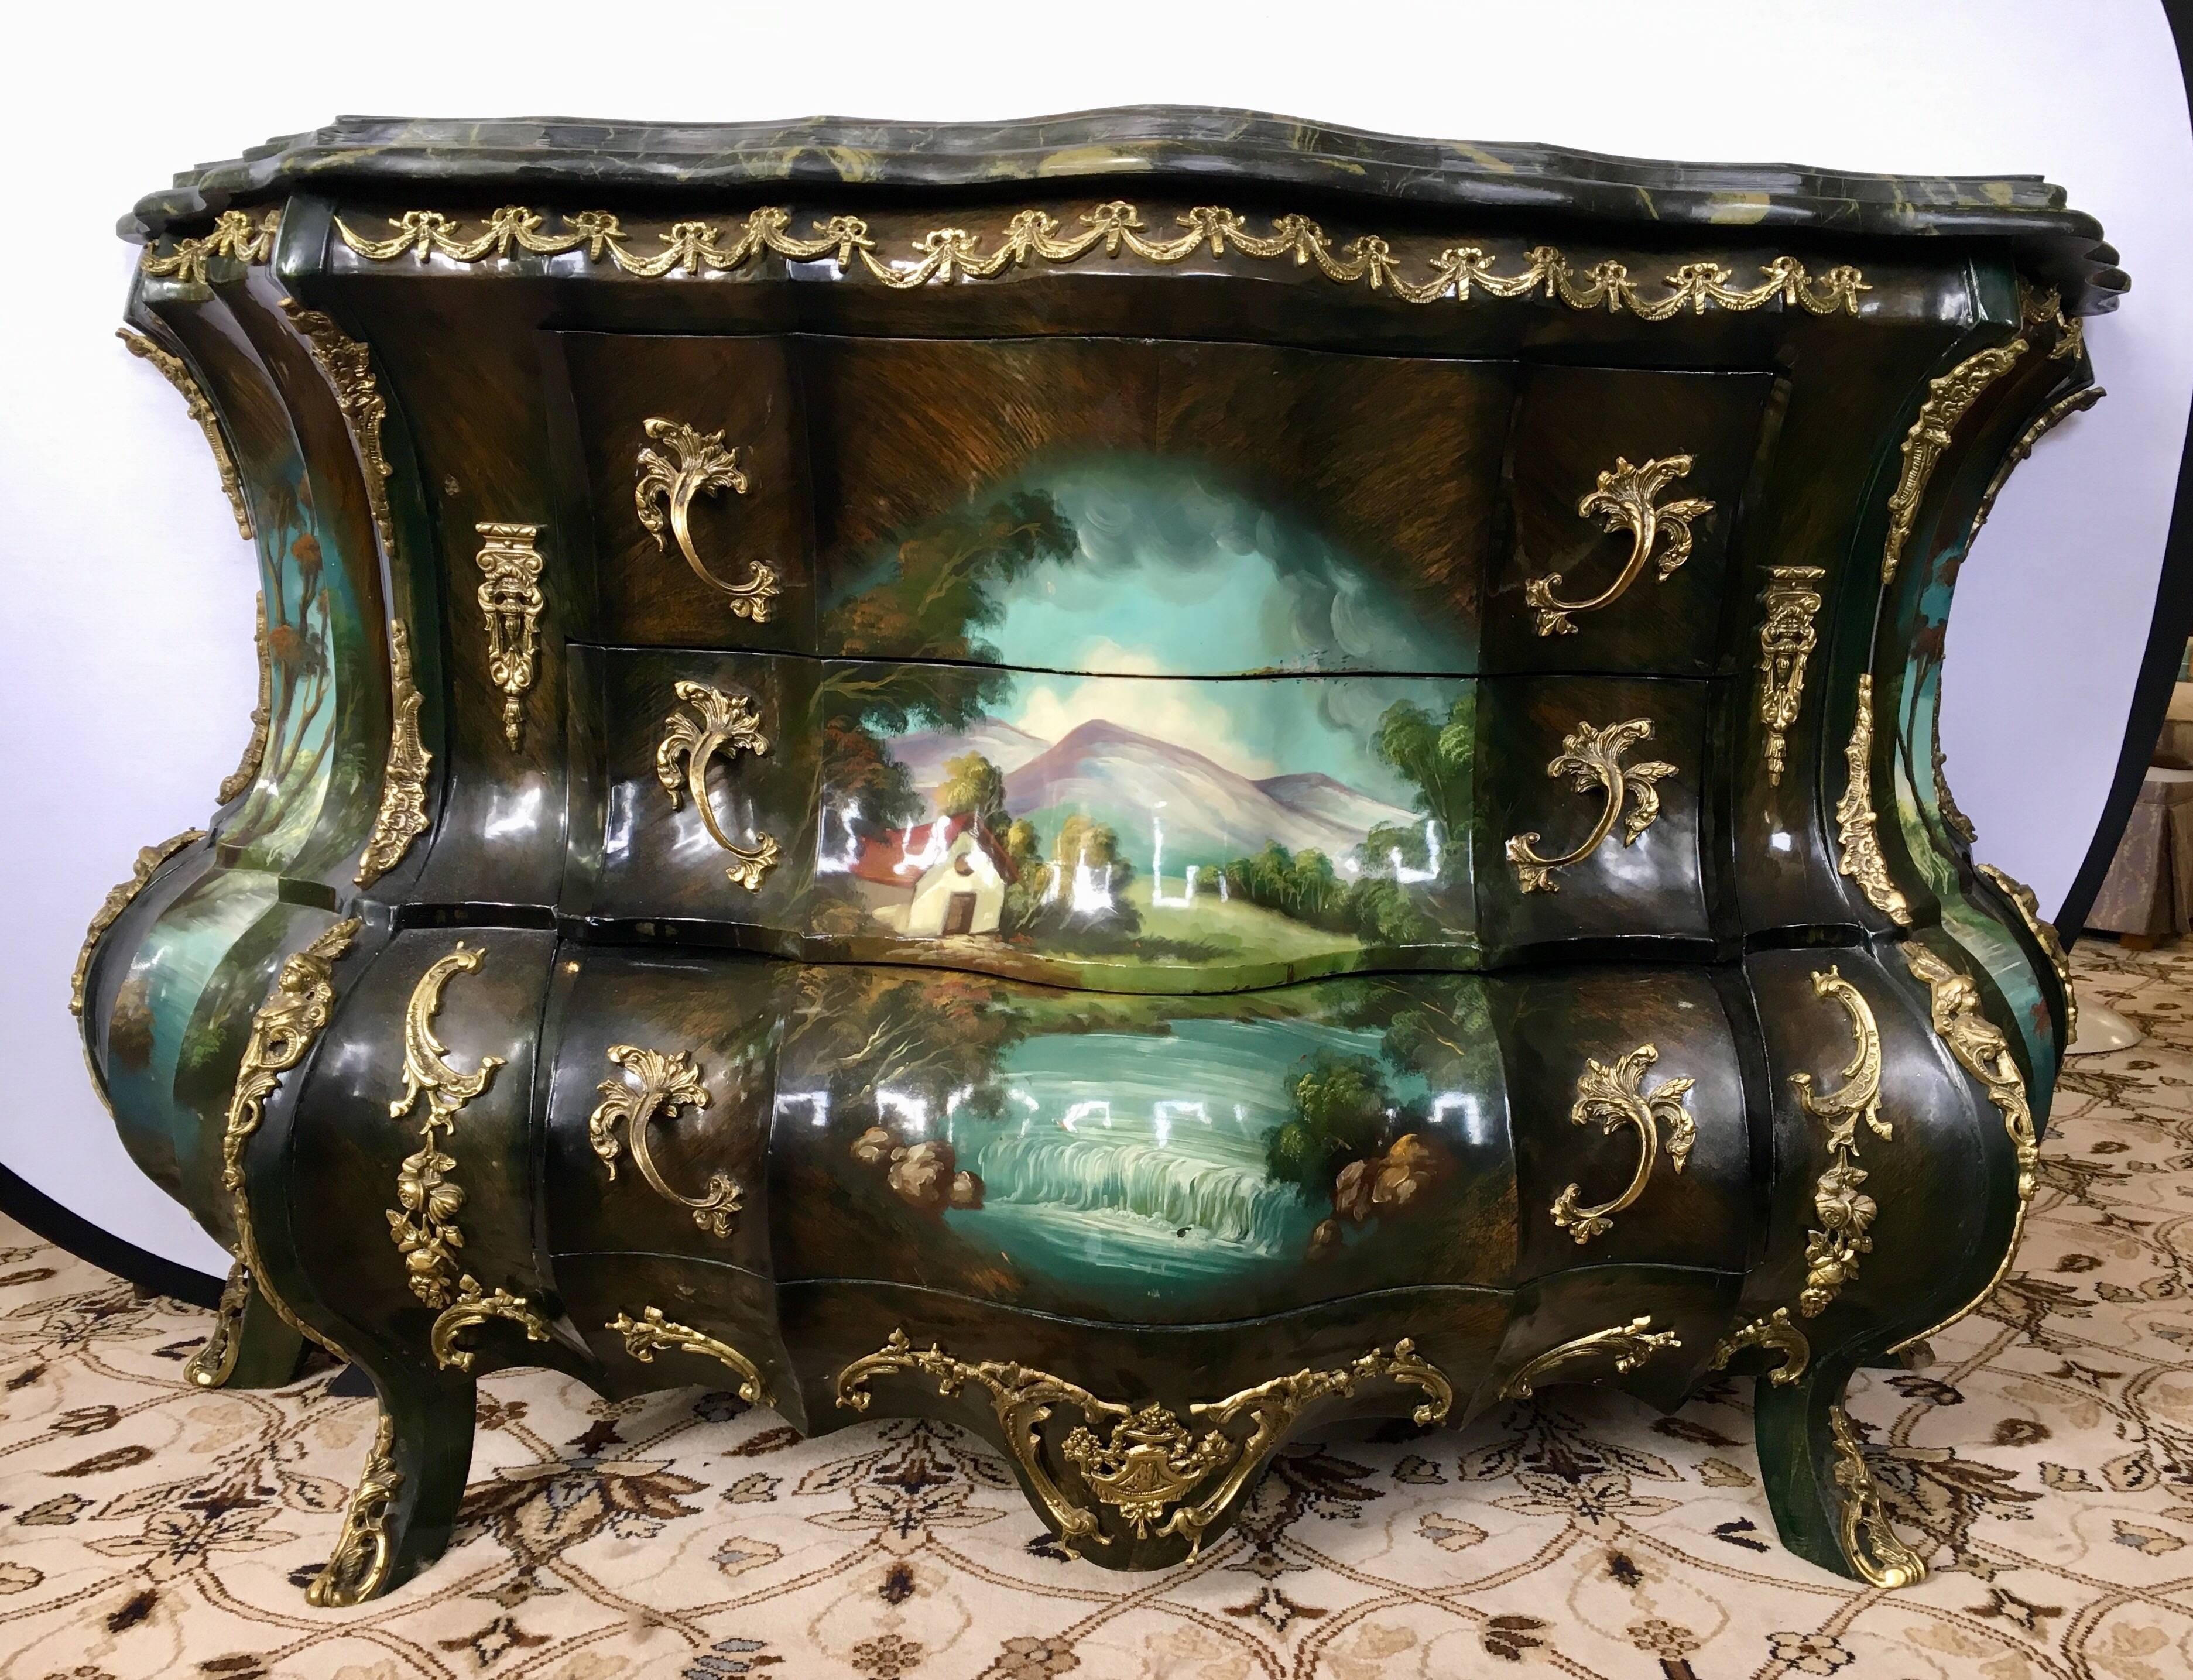 Magnificent, large Louis XV hand-painted bombe commode with marble top and intricate bronze mounts throughout. Truly one of a kind. Three drawers in all of differing sizes with artwork interlocking throughout.